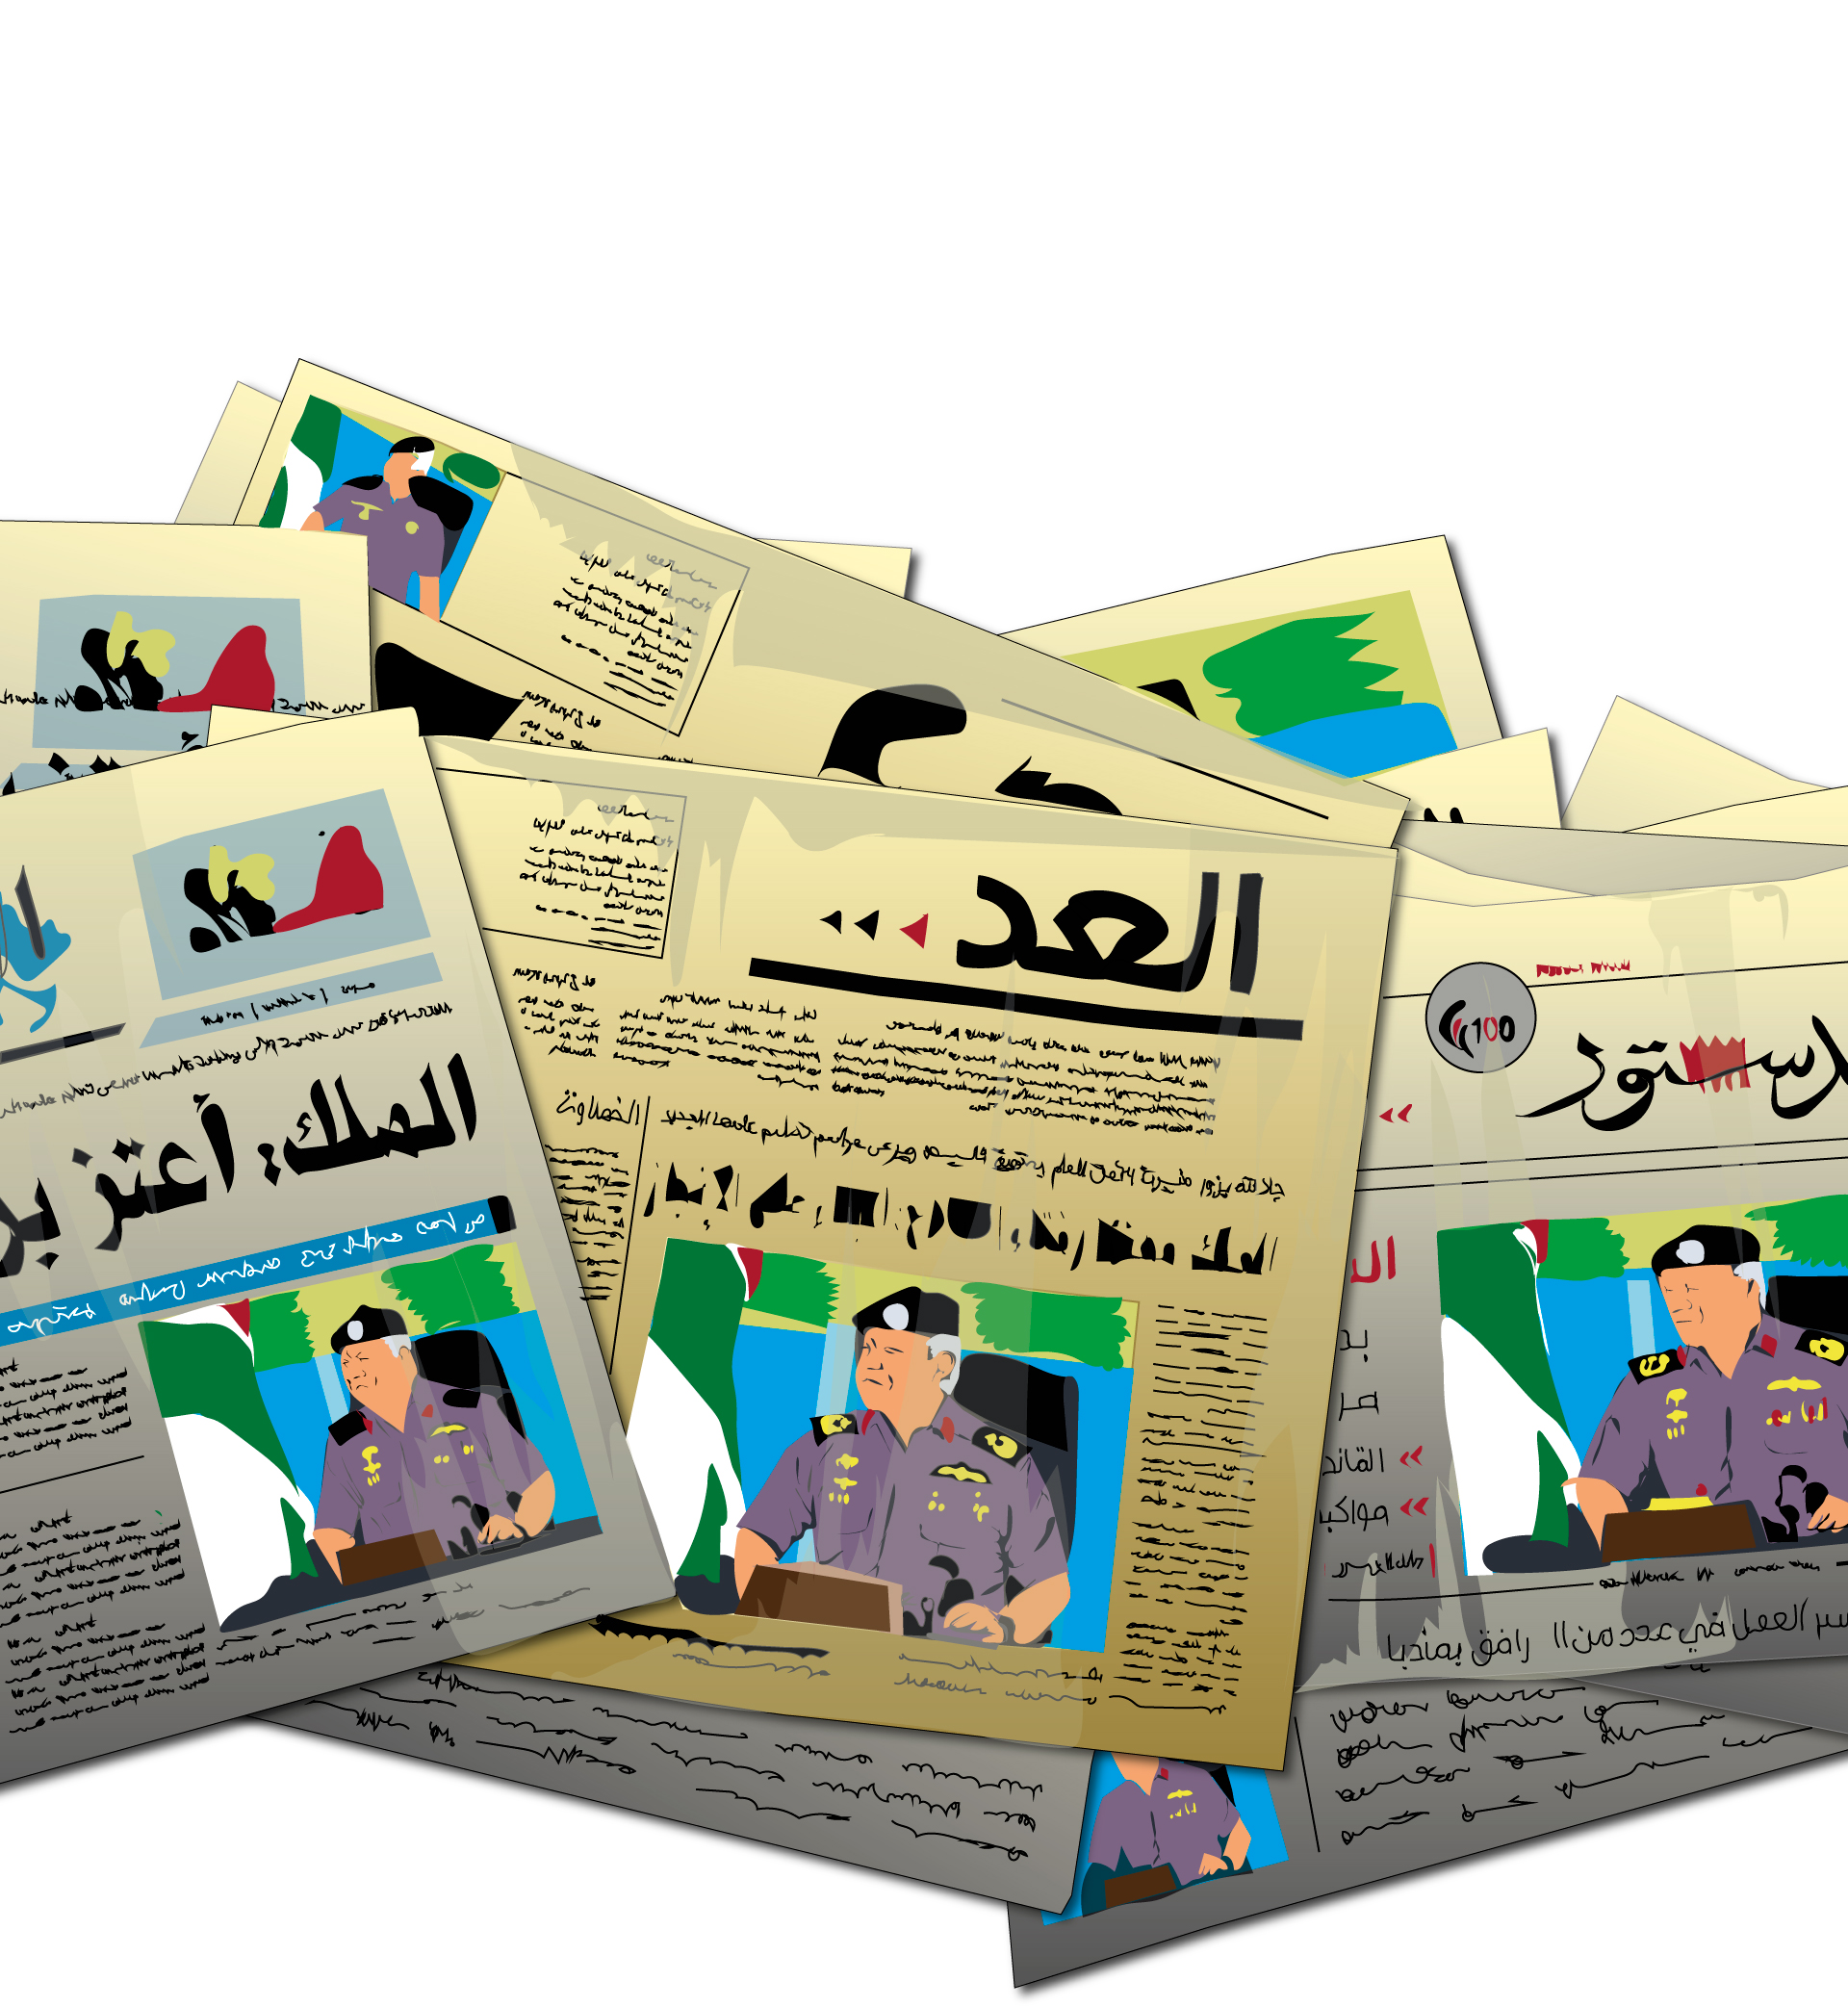 EU Support for the Jordanian Media: A Mixed Bag of Successes and Failures